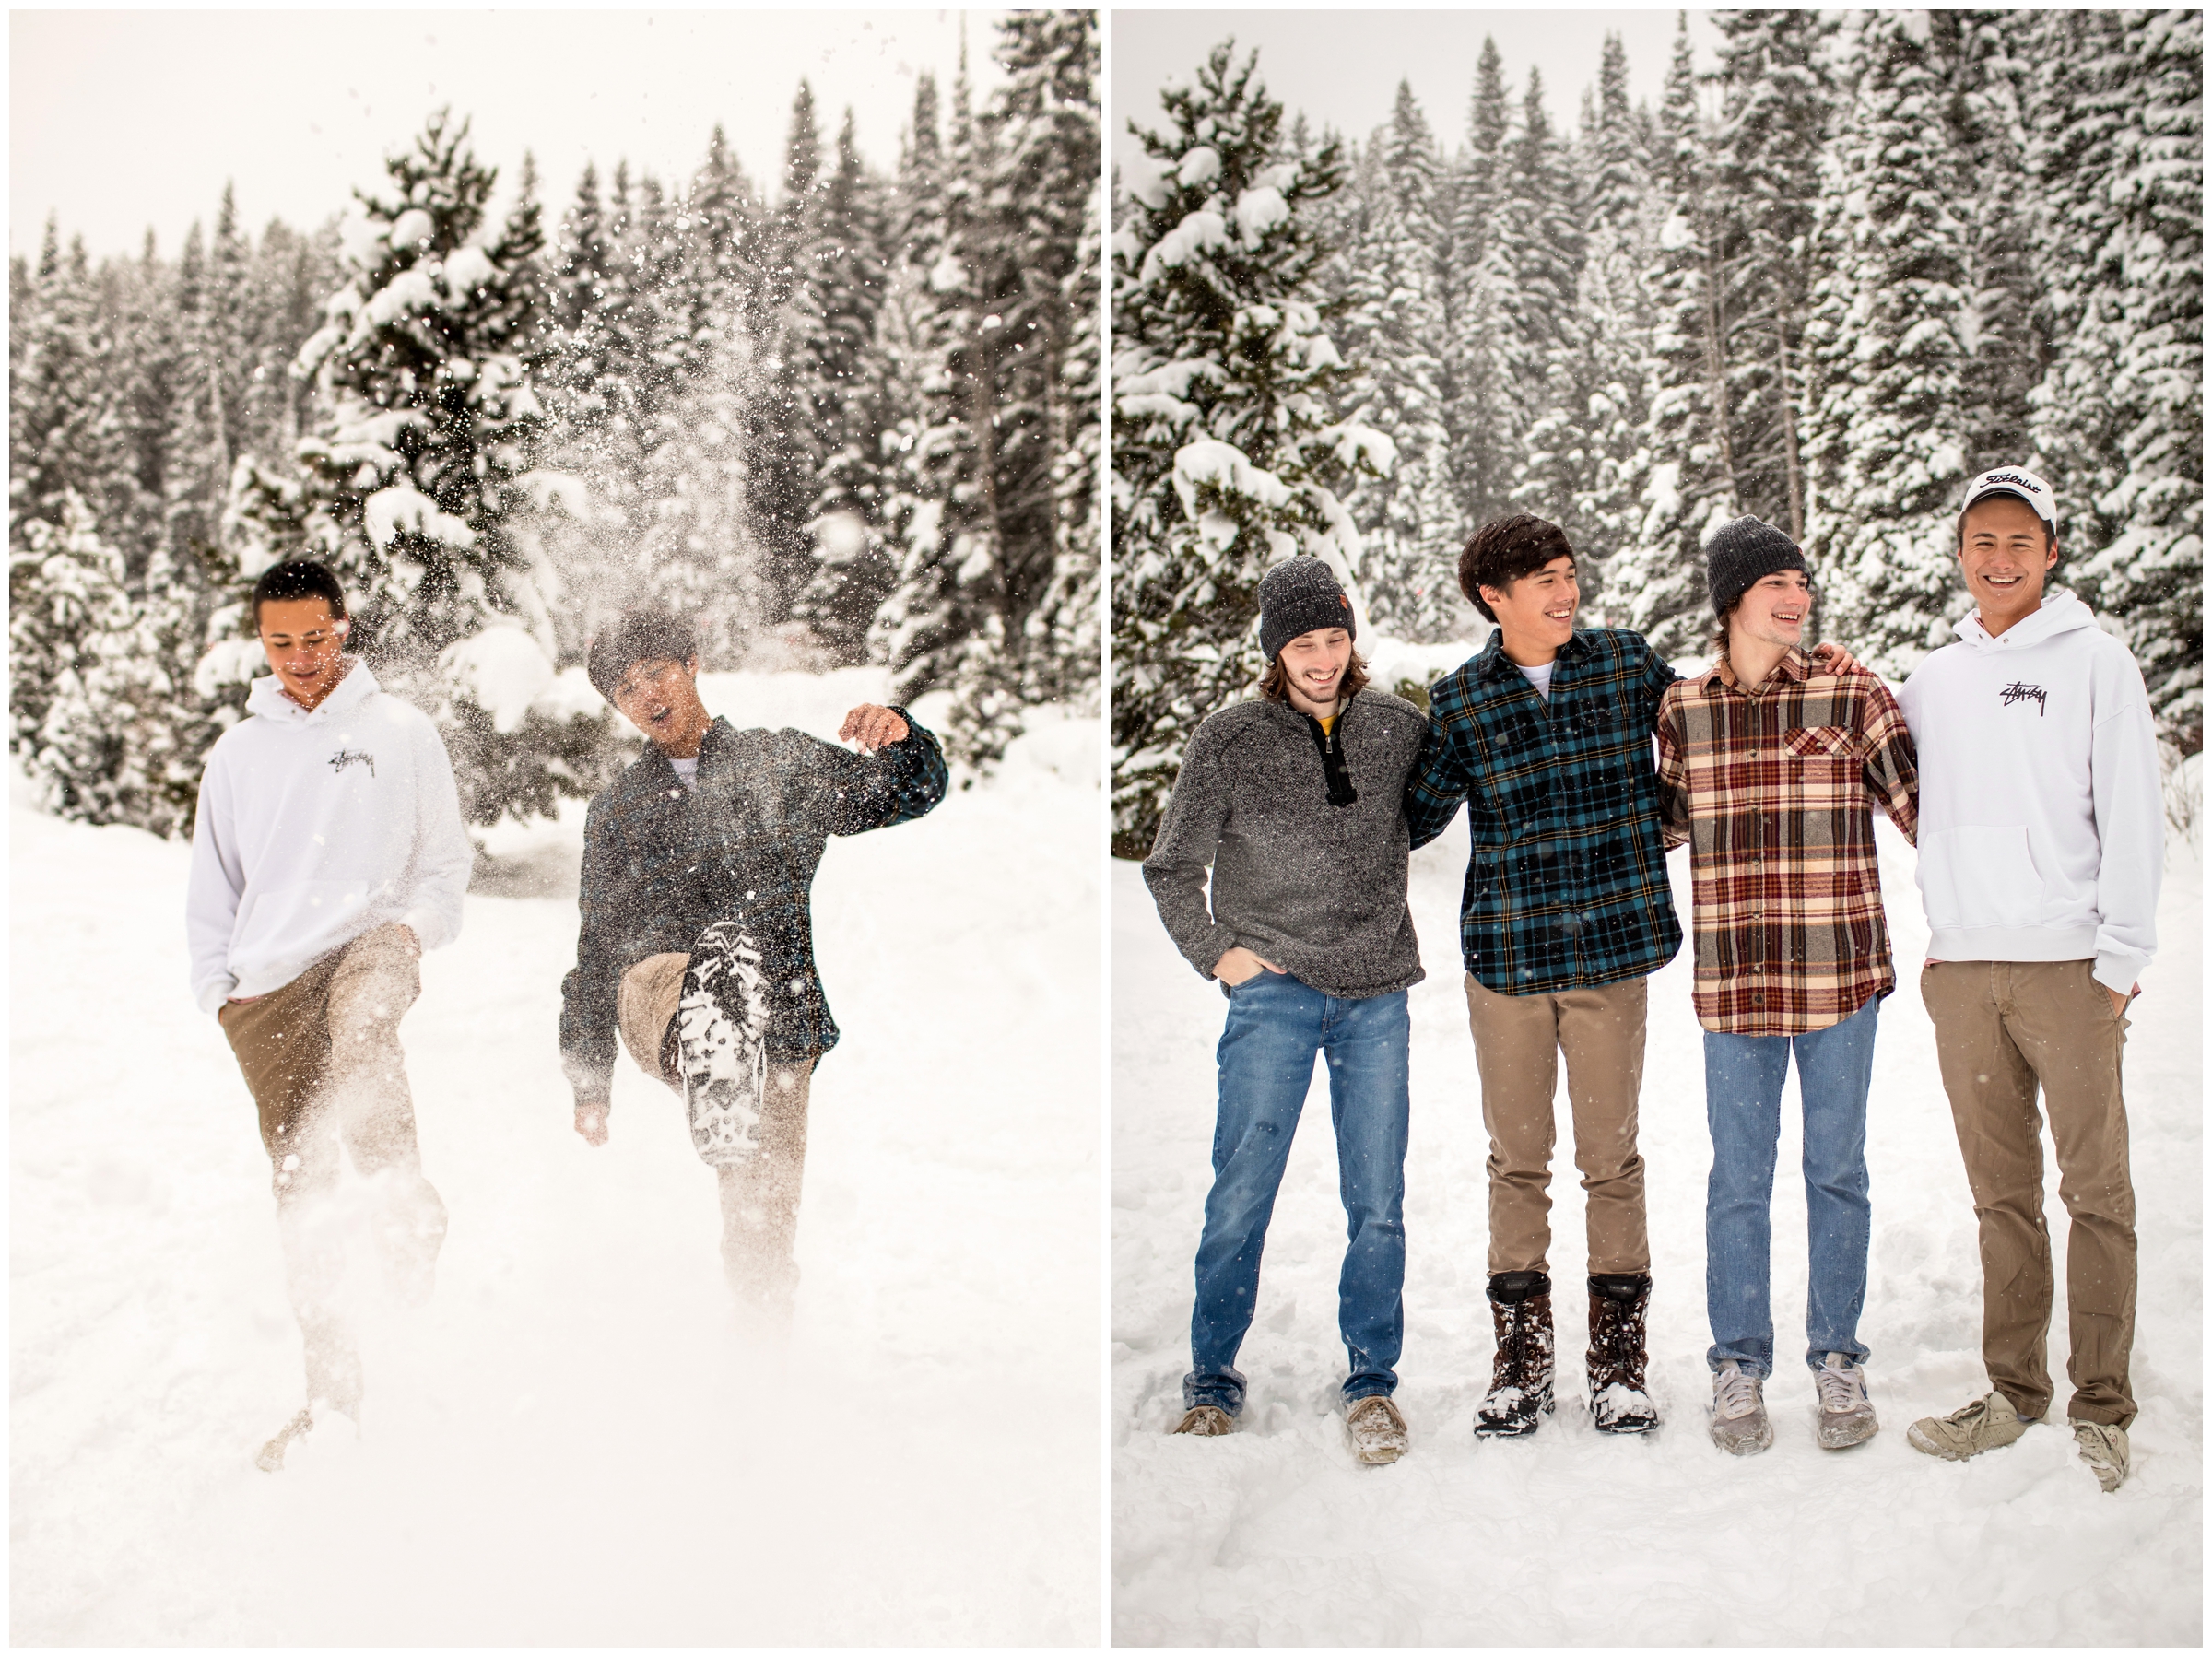 Snowy candid Winter Park family photos in the snow by Colorado portrait photographer Plum Pretty Photography